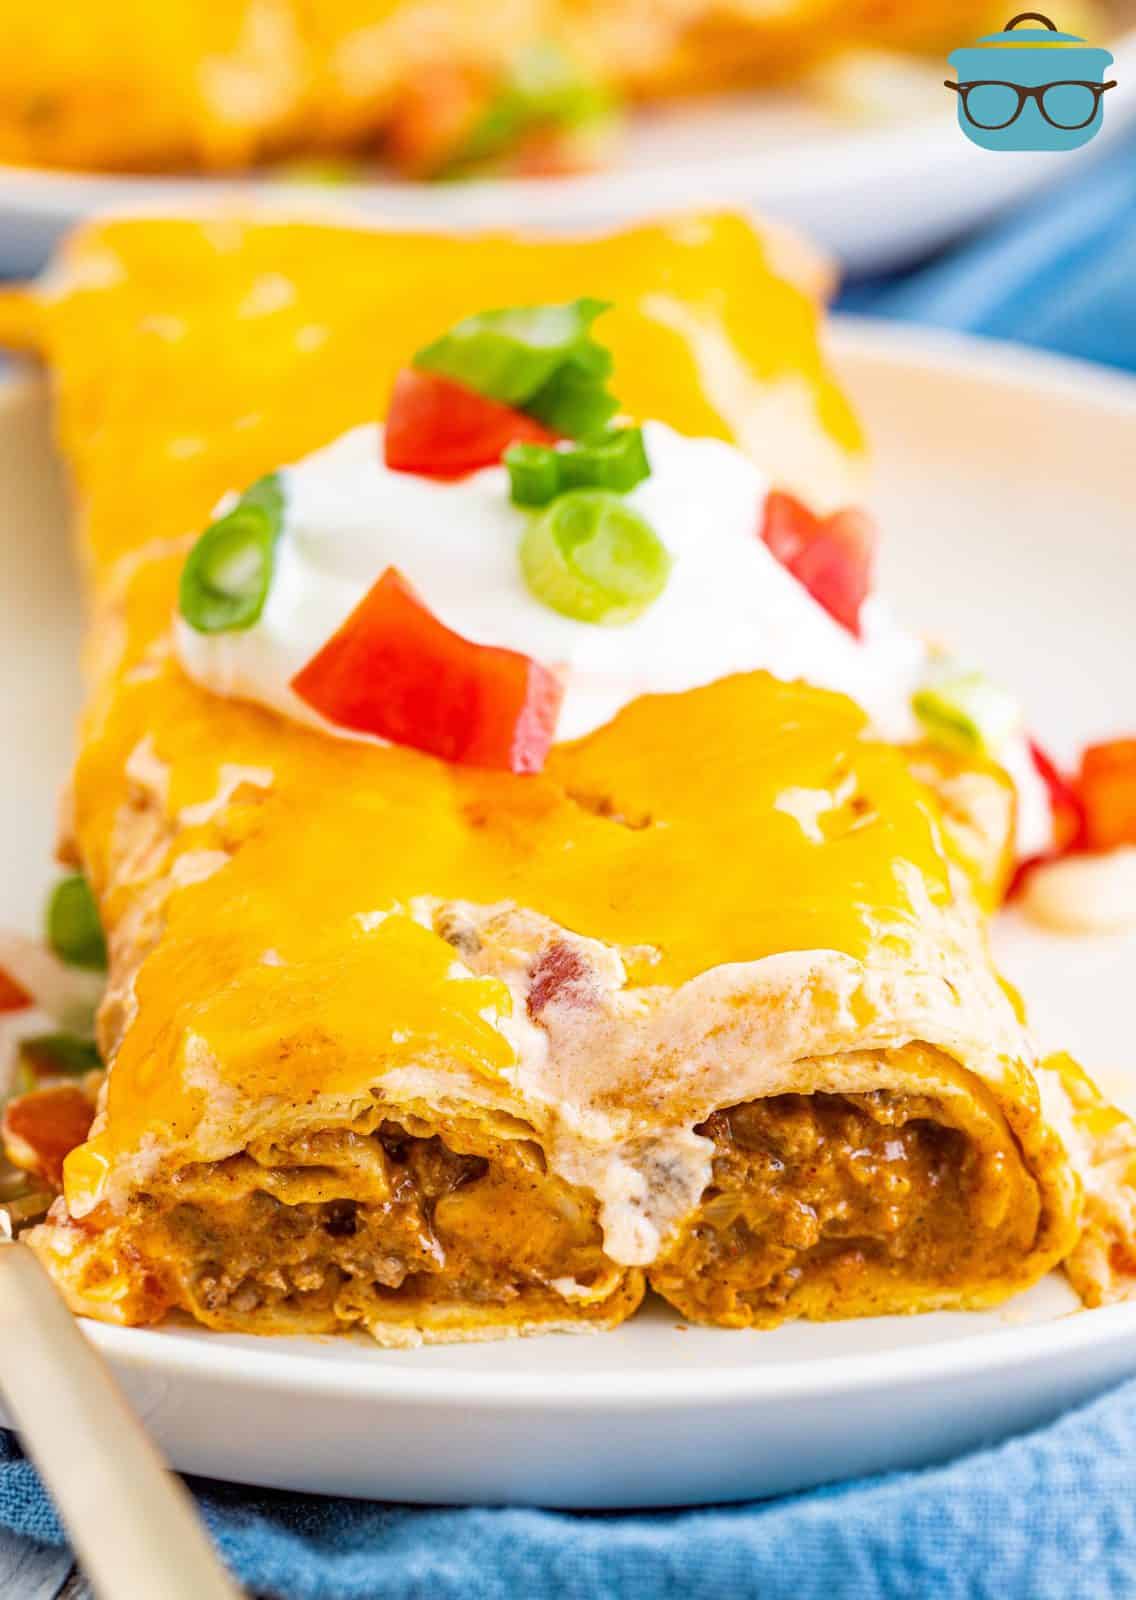 Close up of Ground Beef Enchiladas on plate showing ends and inside.